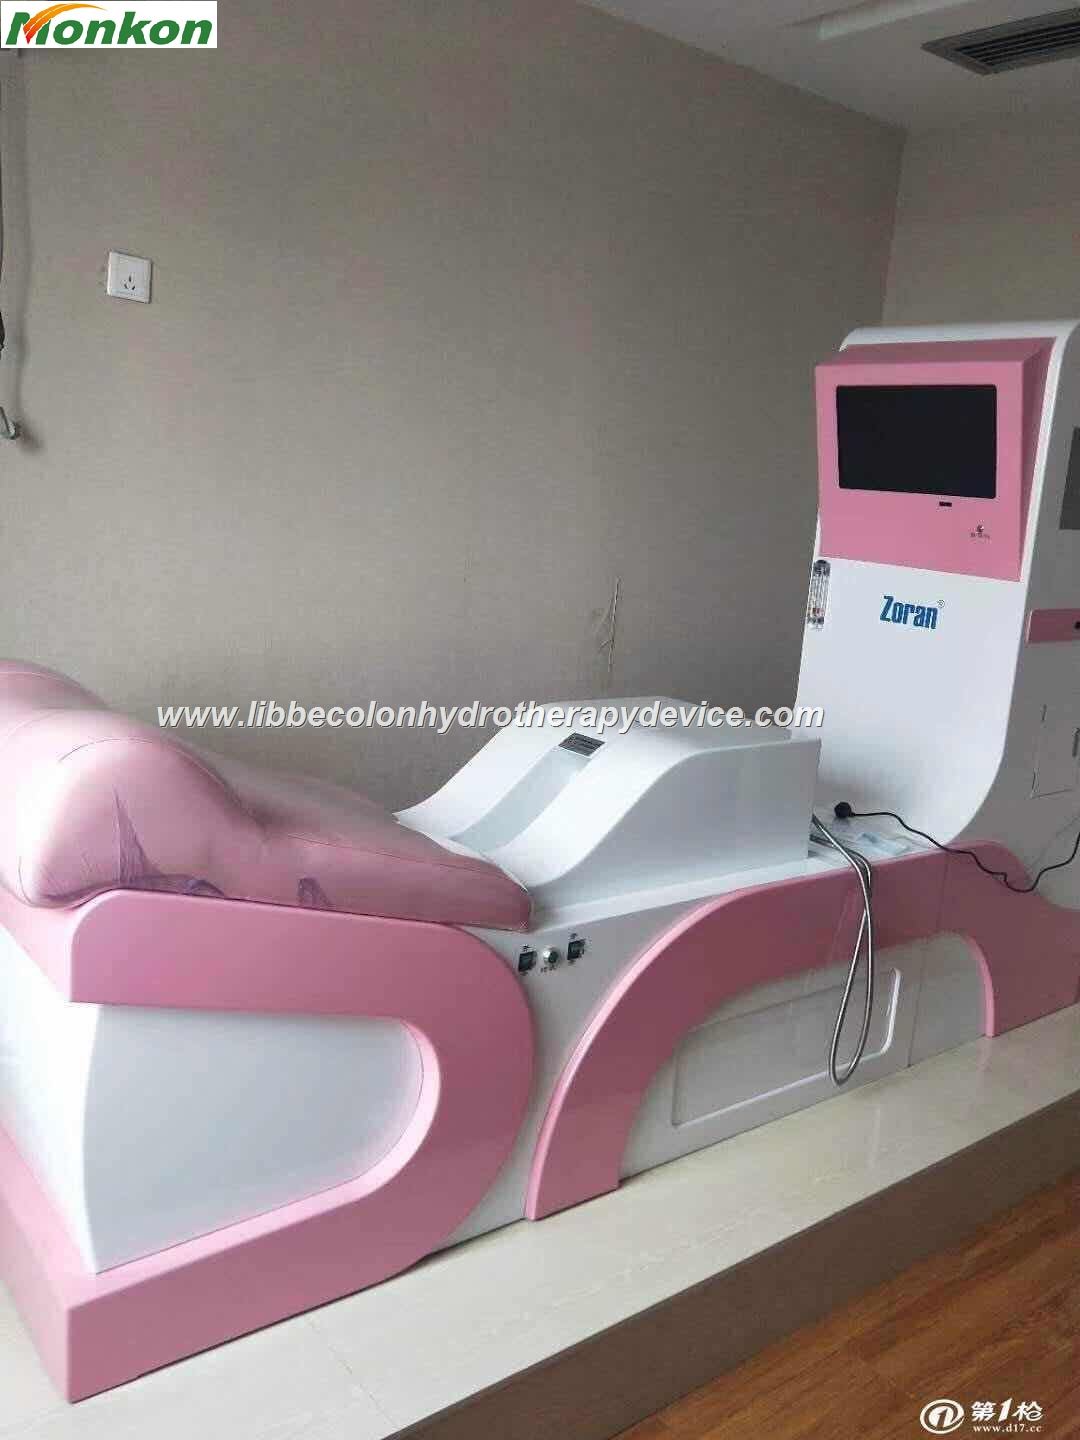 MAIKONG hydrotherapy colon machine